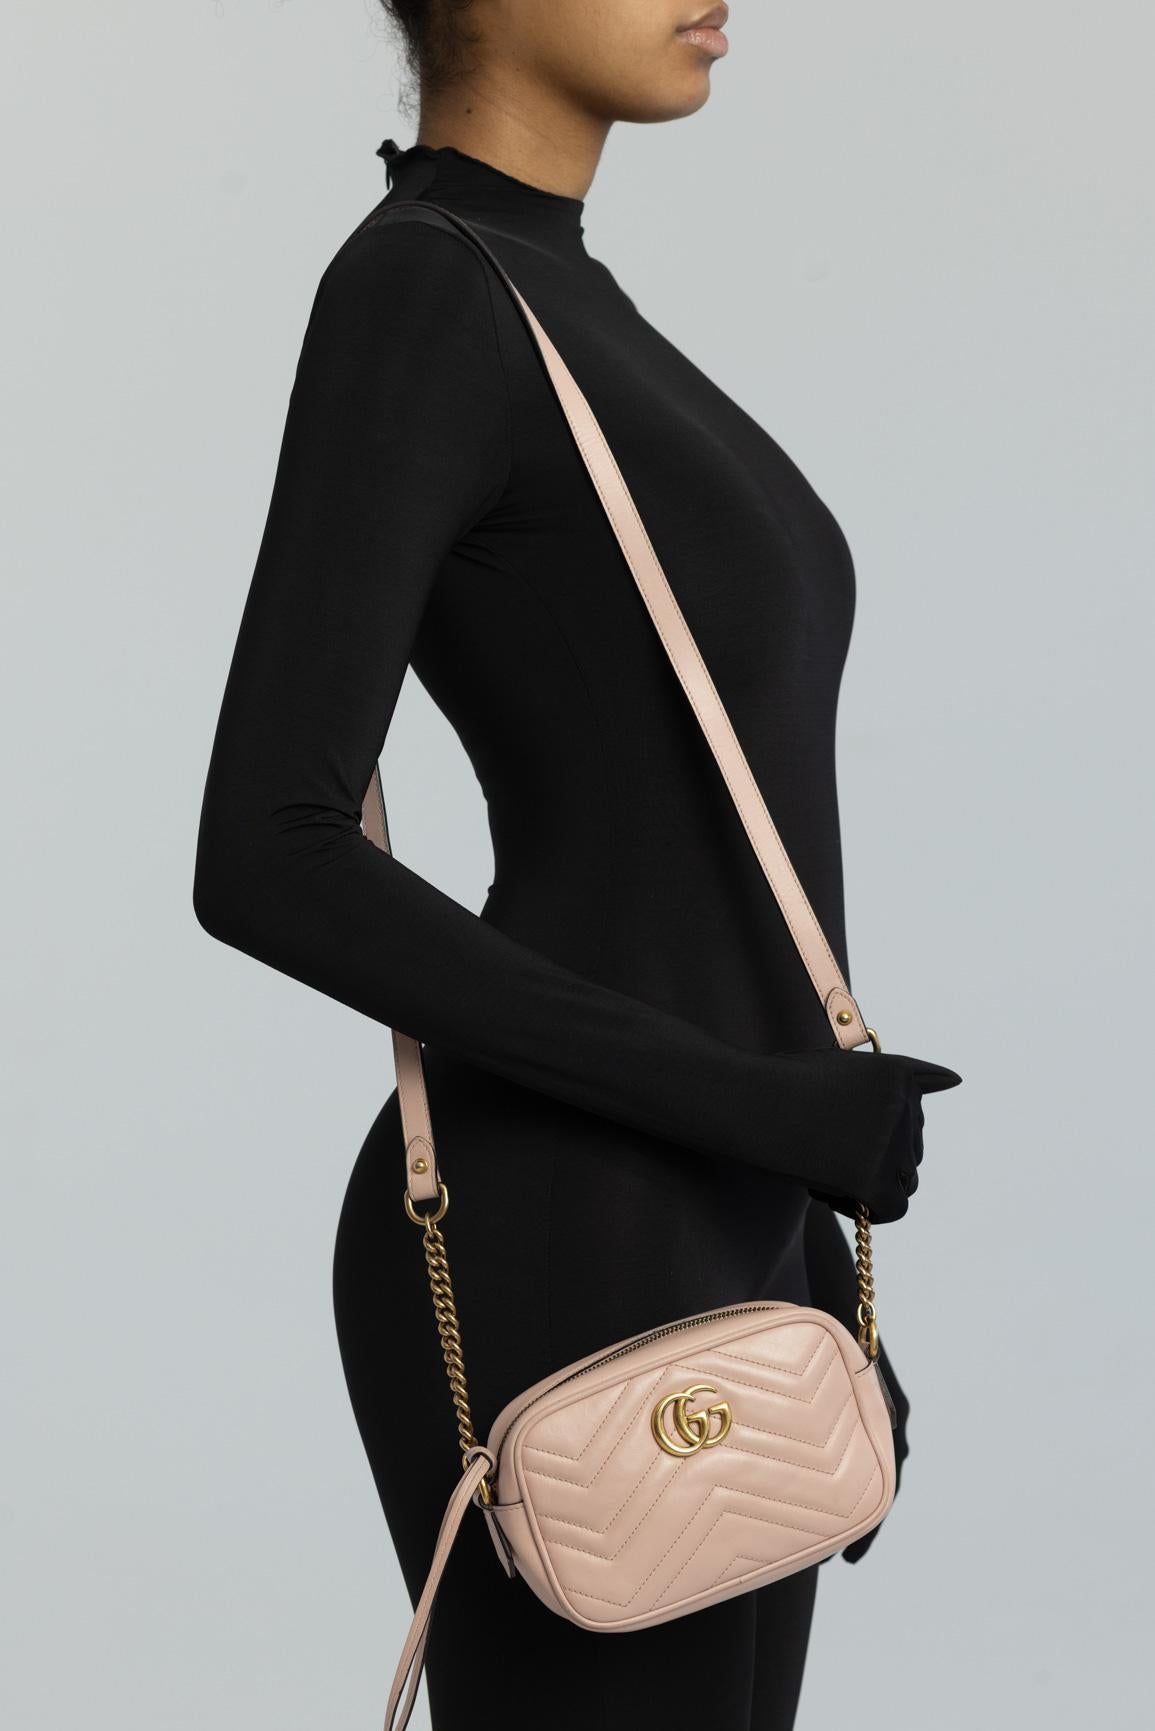 The mini GG Marmont chain shoulder bag has a softly structured shape and a zip top closure with Double G hardware. The chain strap has a leather shoulder detail. The camera bag is made in matelassé leather with a chevron design and GG on the